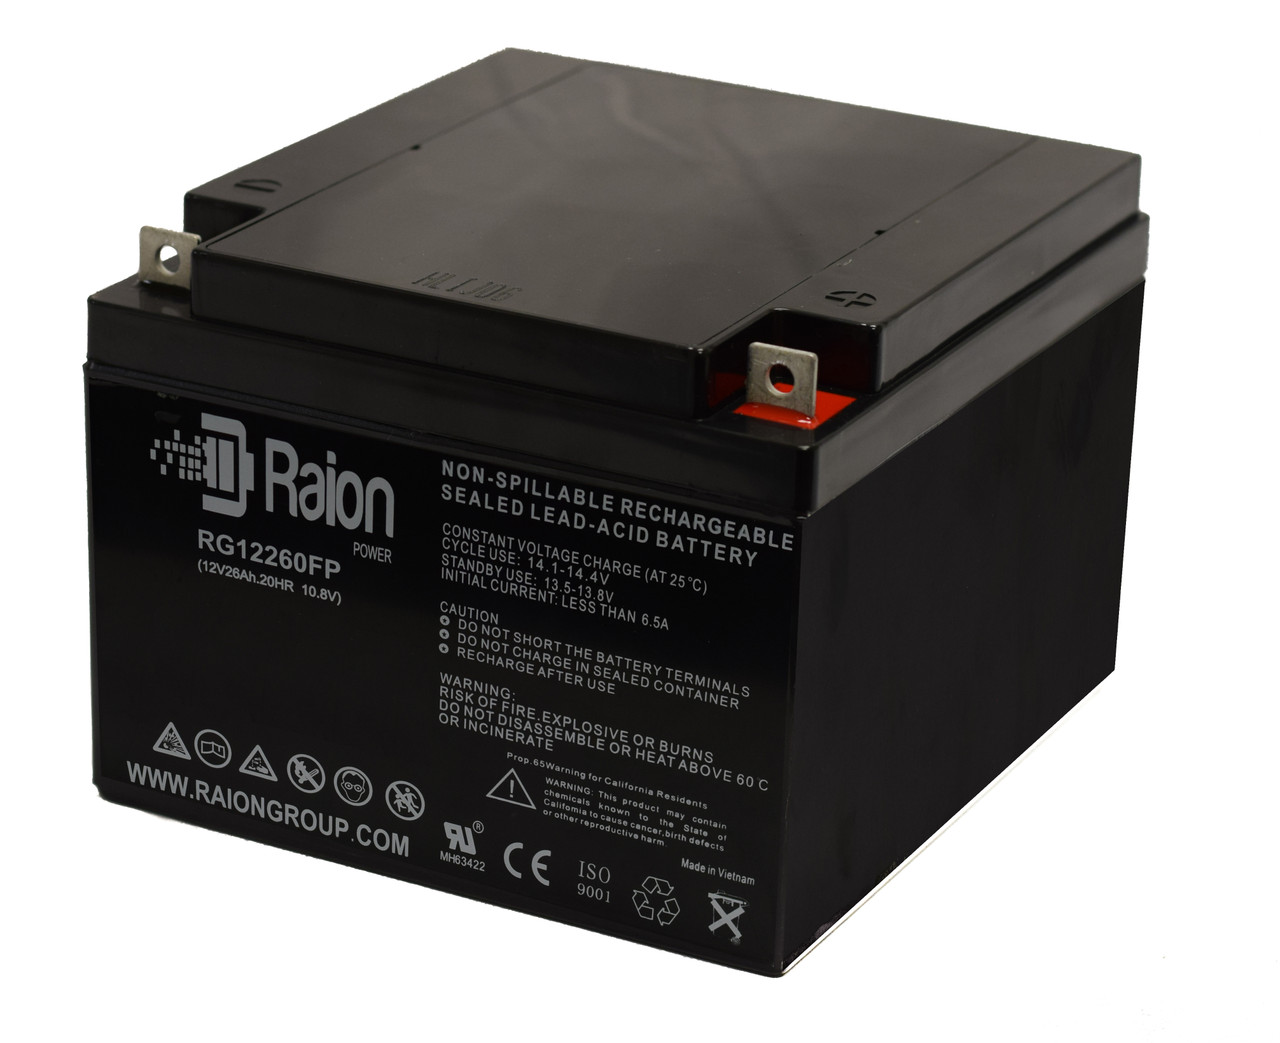 Raion Power Replacement 12V 26Ah Battery for Amsco Surgical Table 3080 RL Motor - 1 Pack